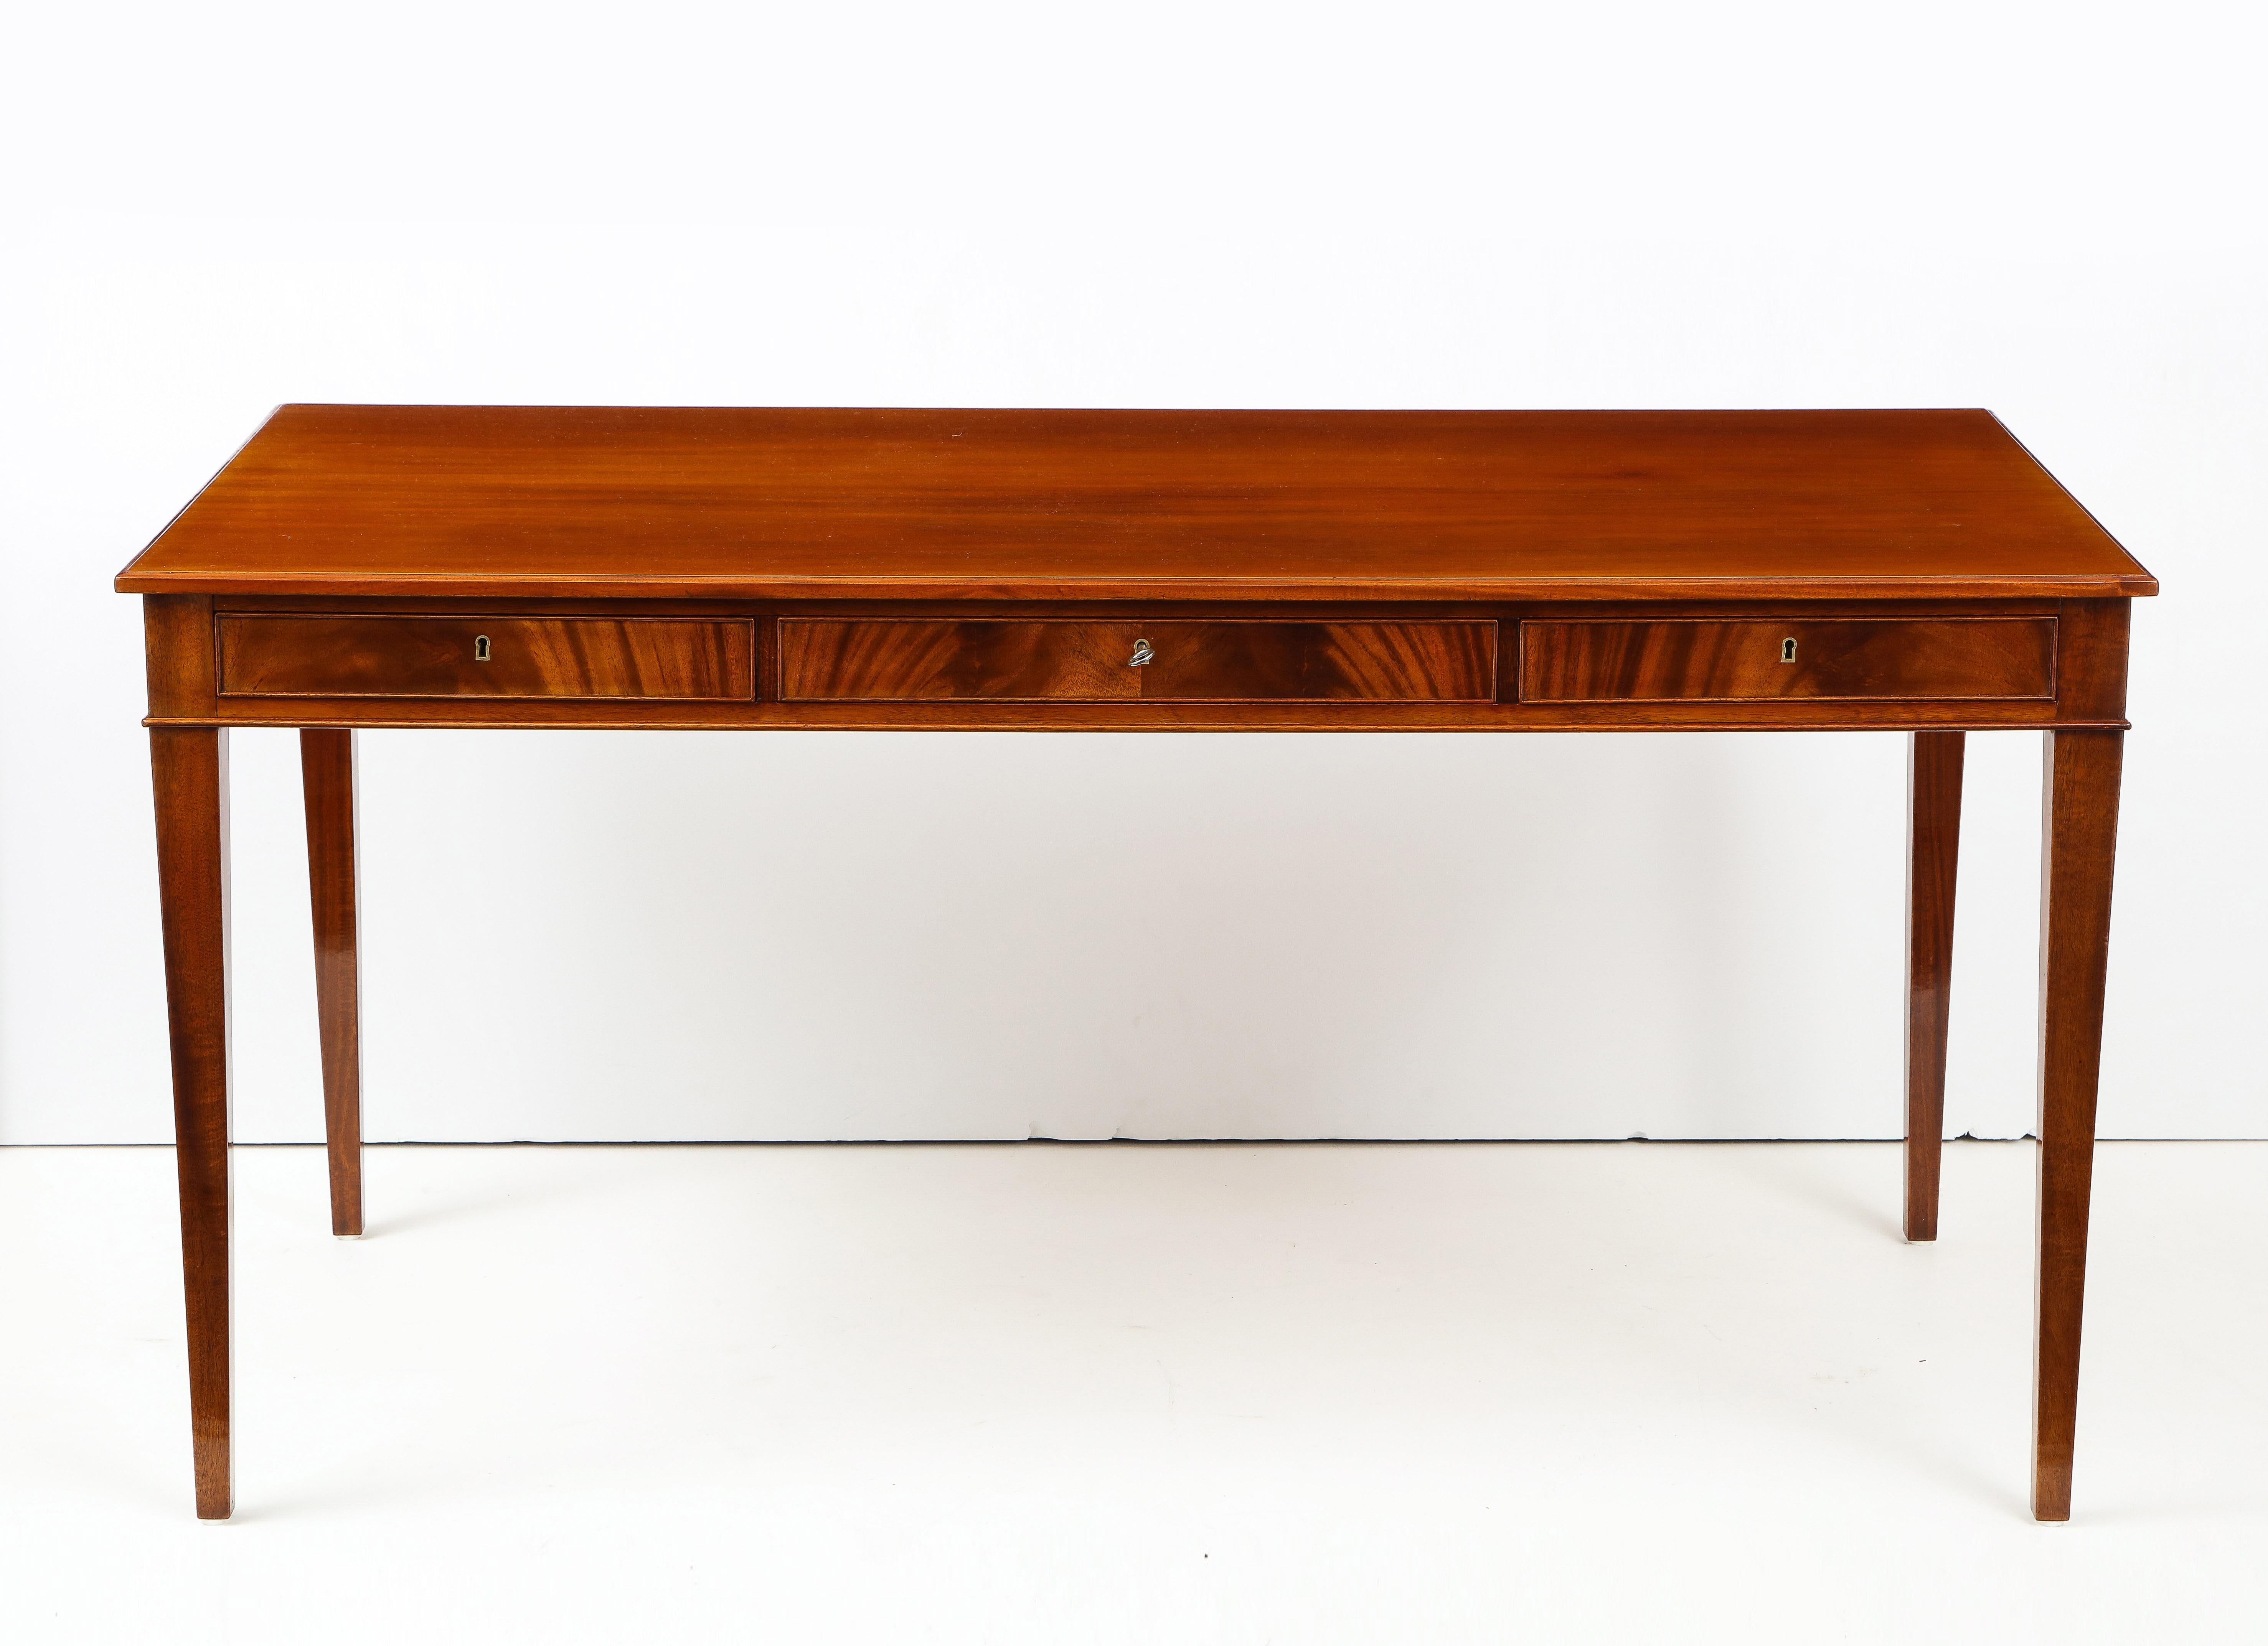 A Danish mahogany writing table by Frits Henningsen, furniture designer and cabinet maker (1889-1965). This desk is a Classic example of Henningsen's elegant clean lines and use of quality woods with perfect balanced craftsmanship. A rectangular top